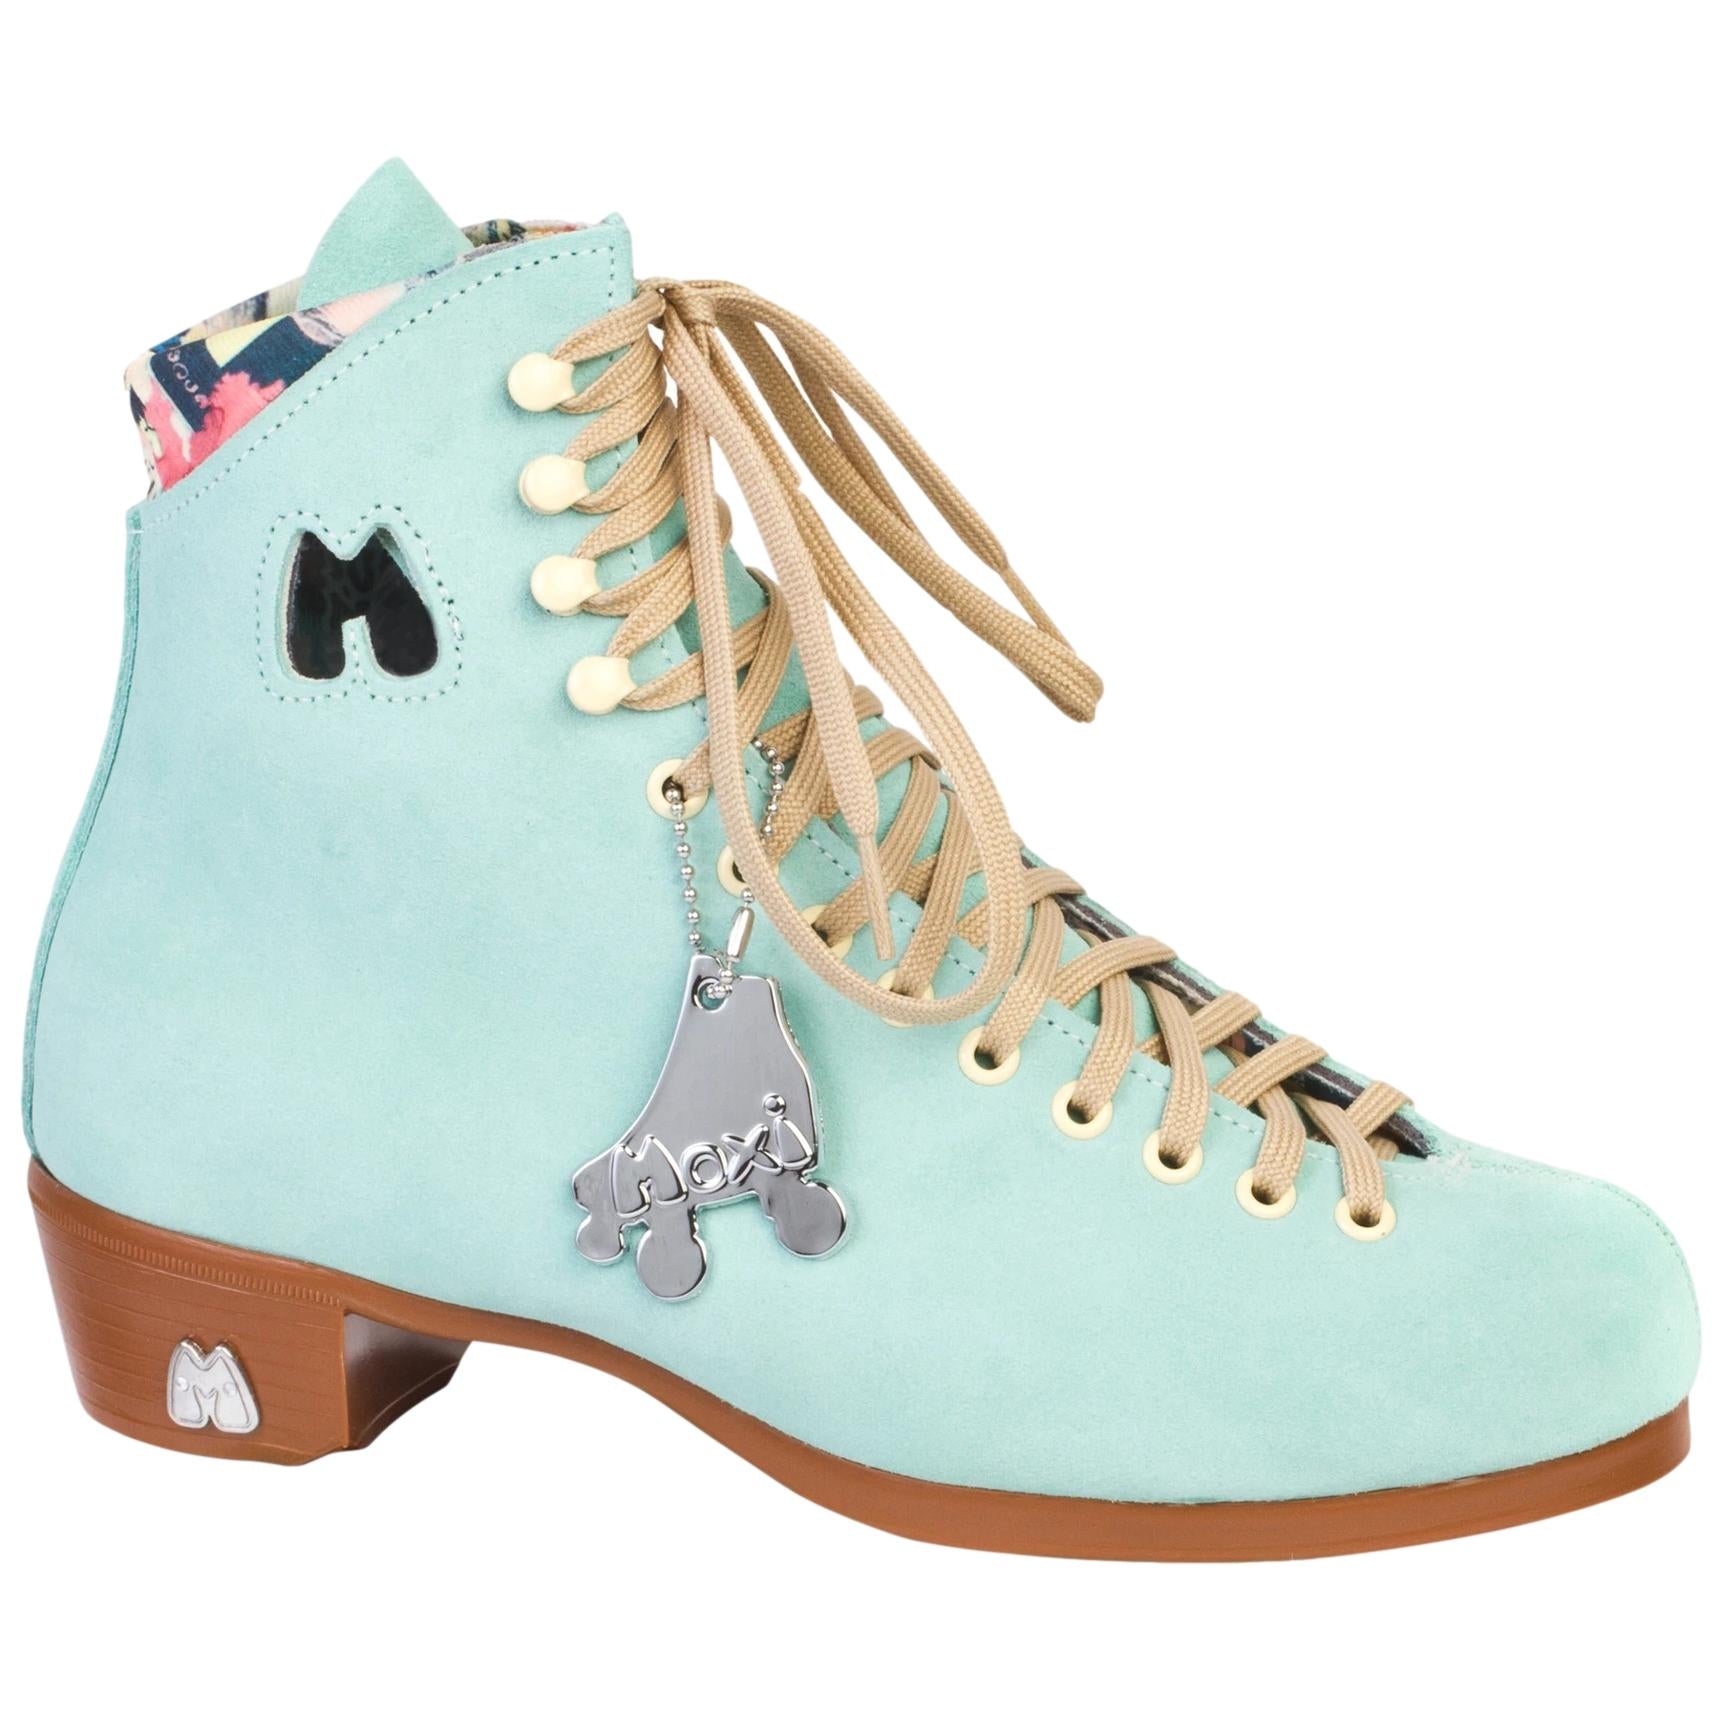 Moxi Lolly Floss Teal Boots